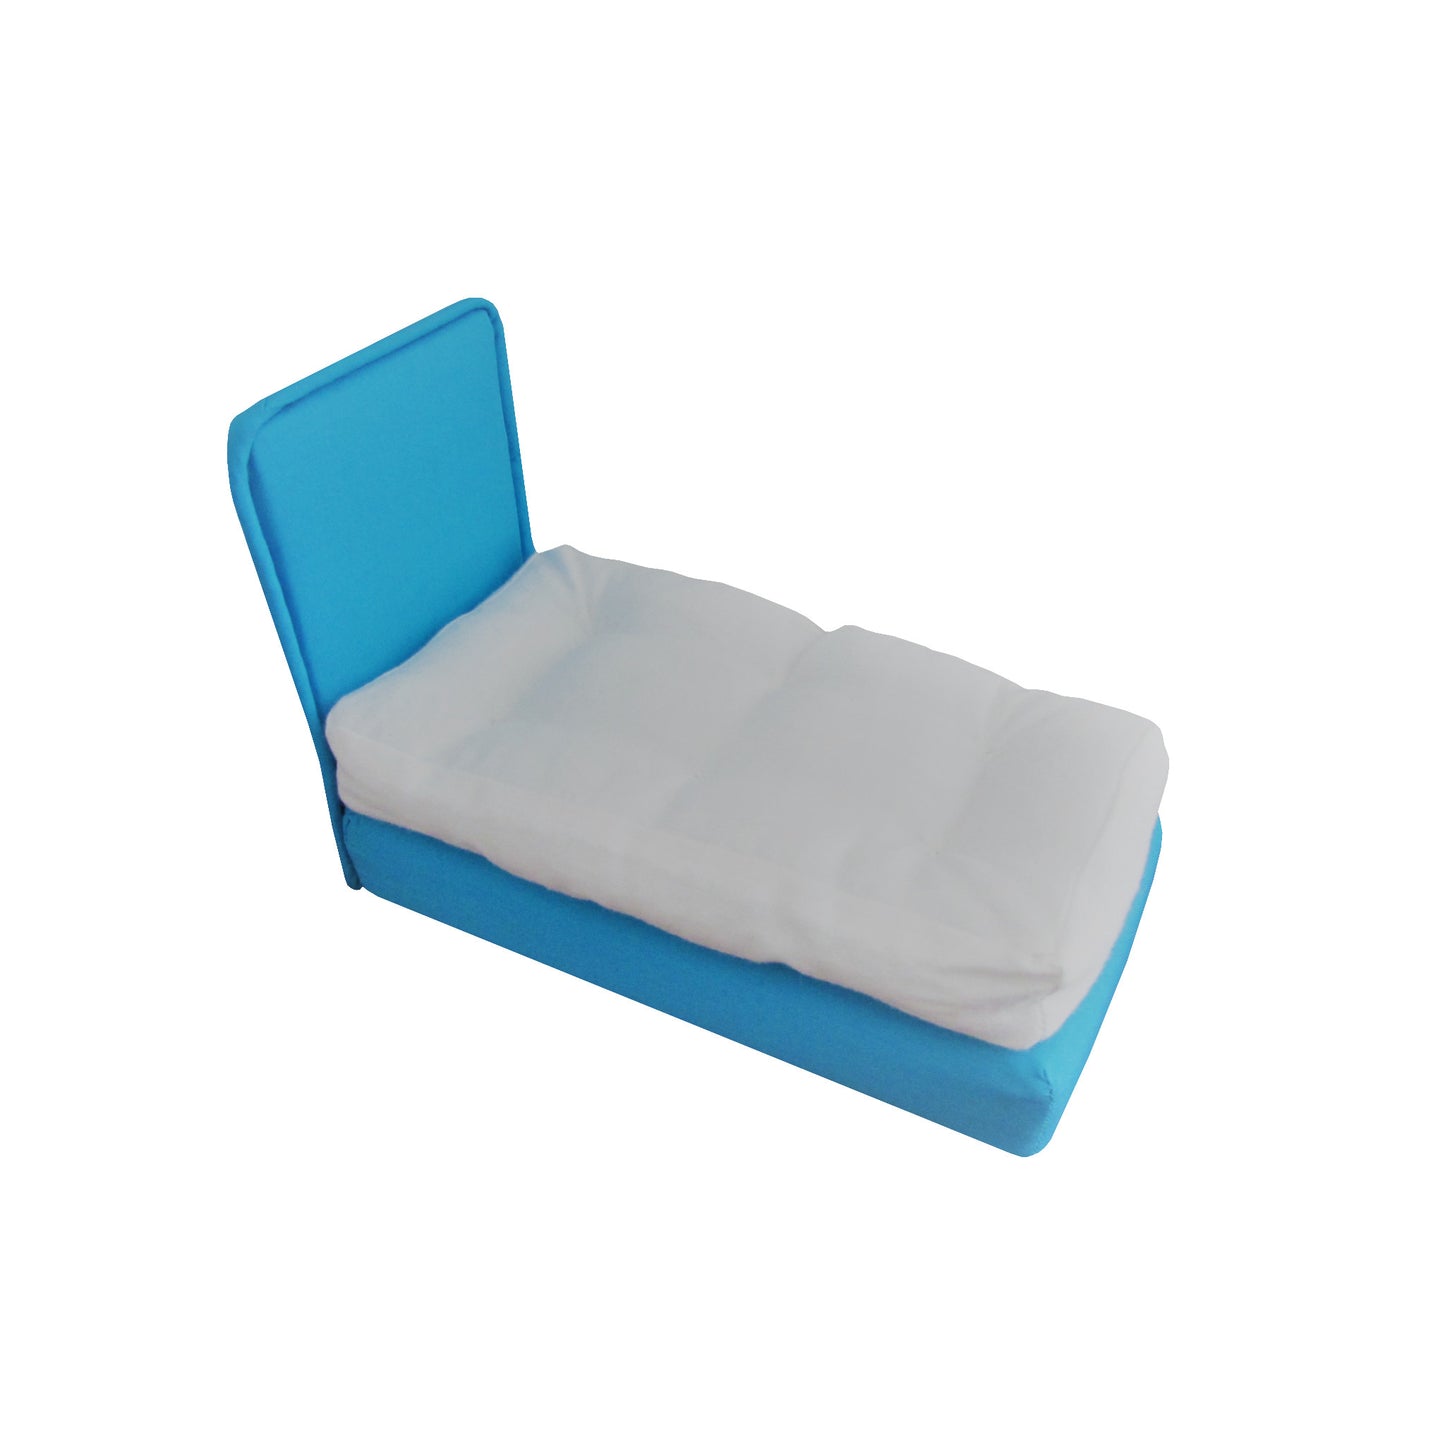 Upholstered Turquoise Doll Bed for 6.5-inch dolls